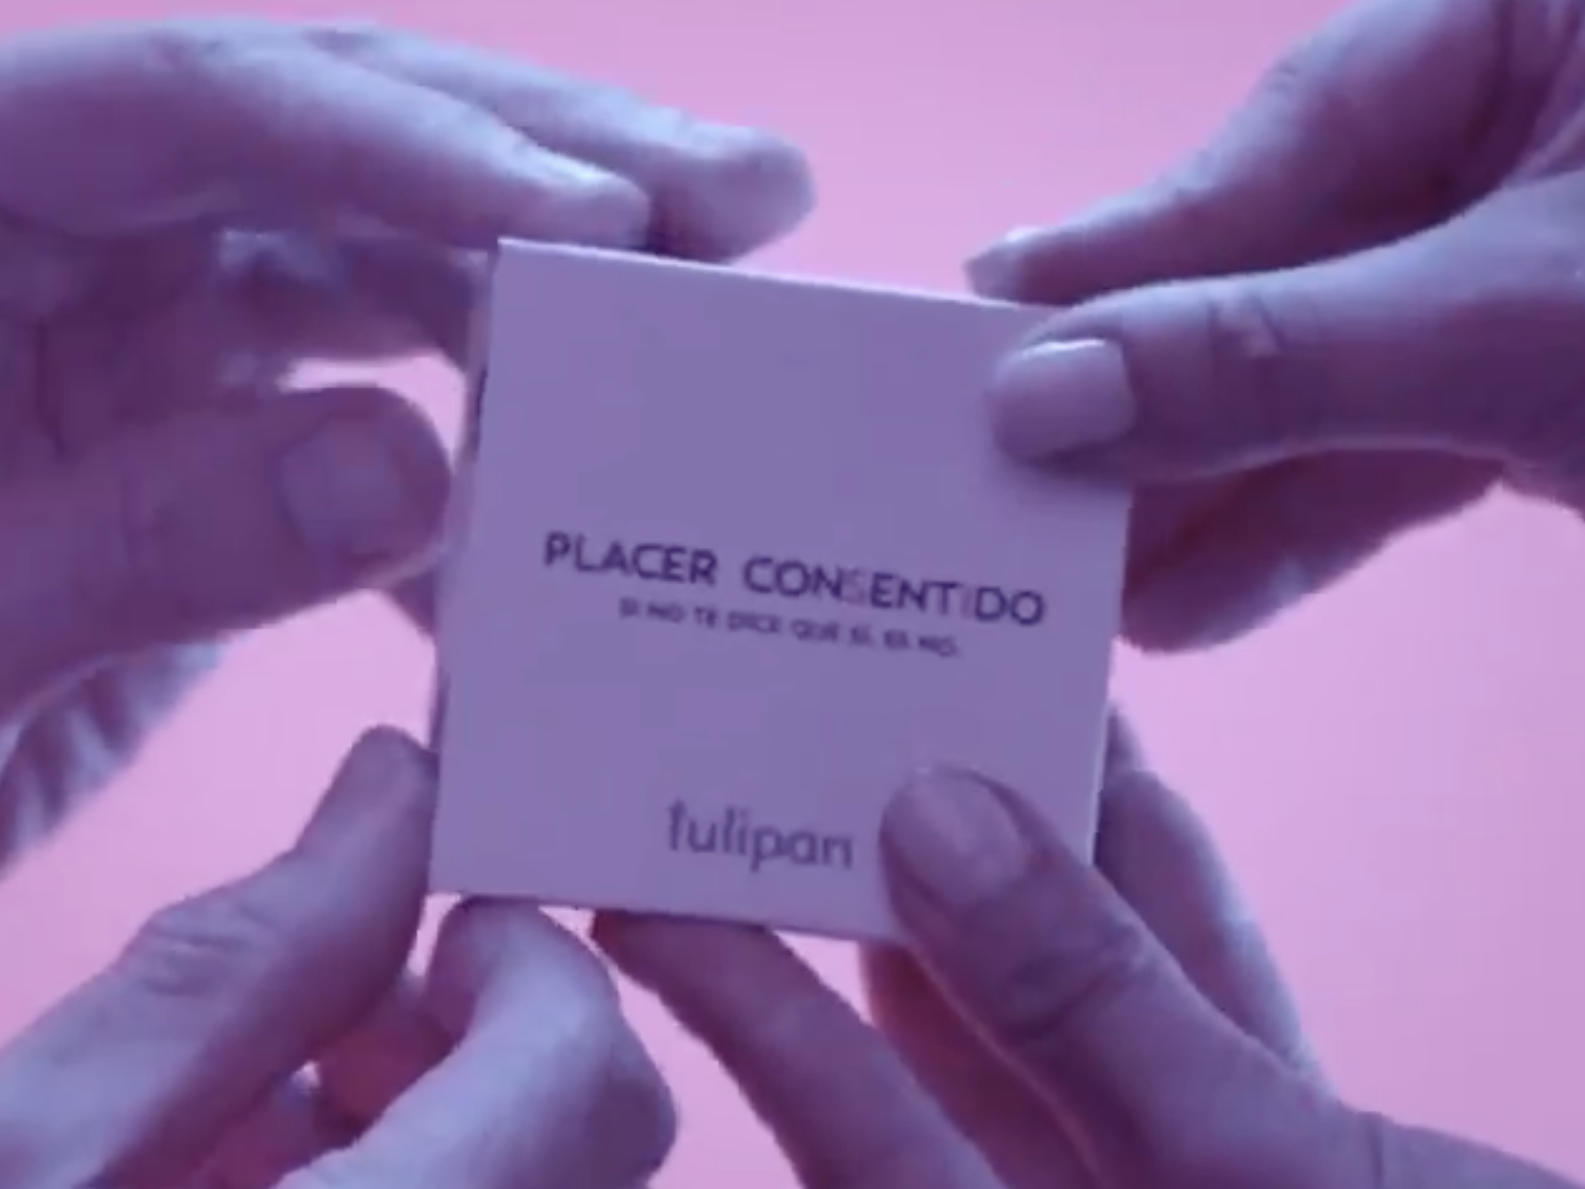 Argentenian company Tulipán has designed a condom packet that requires two people to open it (Twitter: Tulipan)